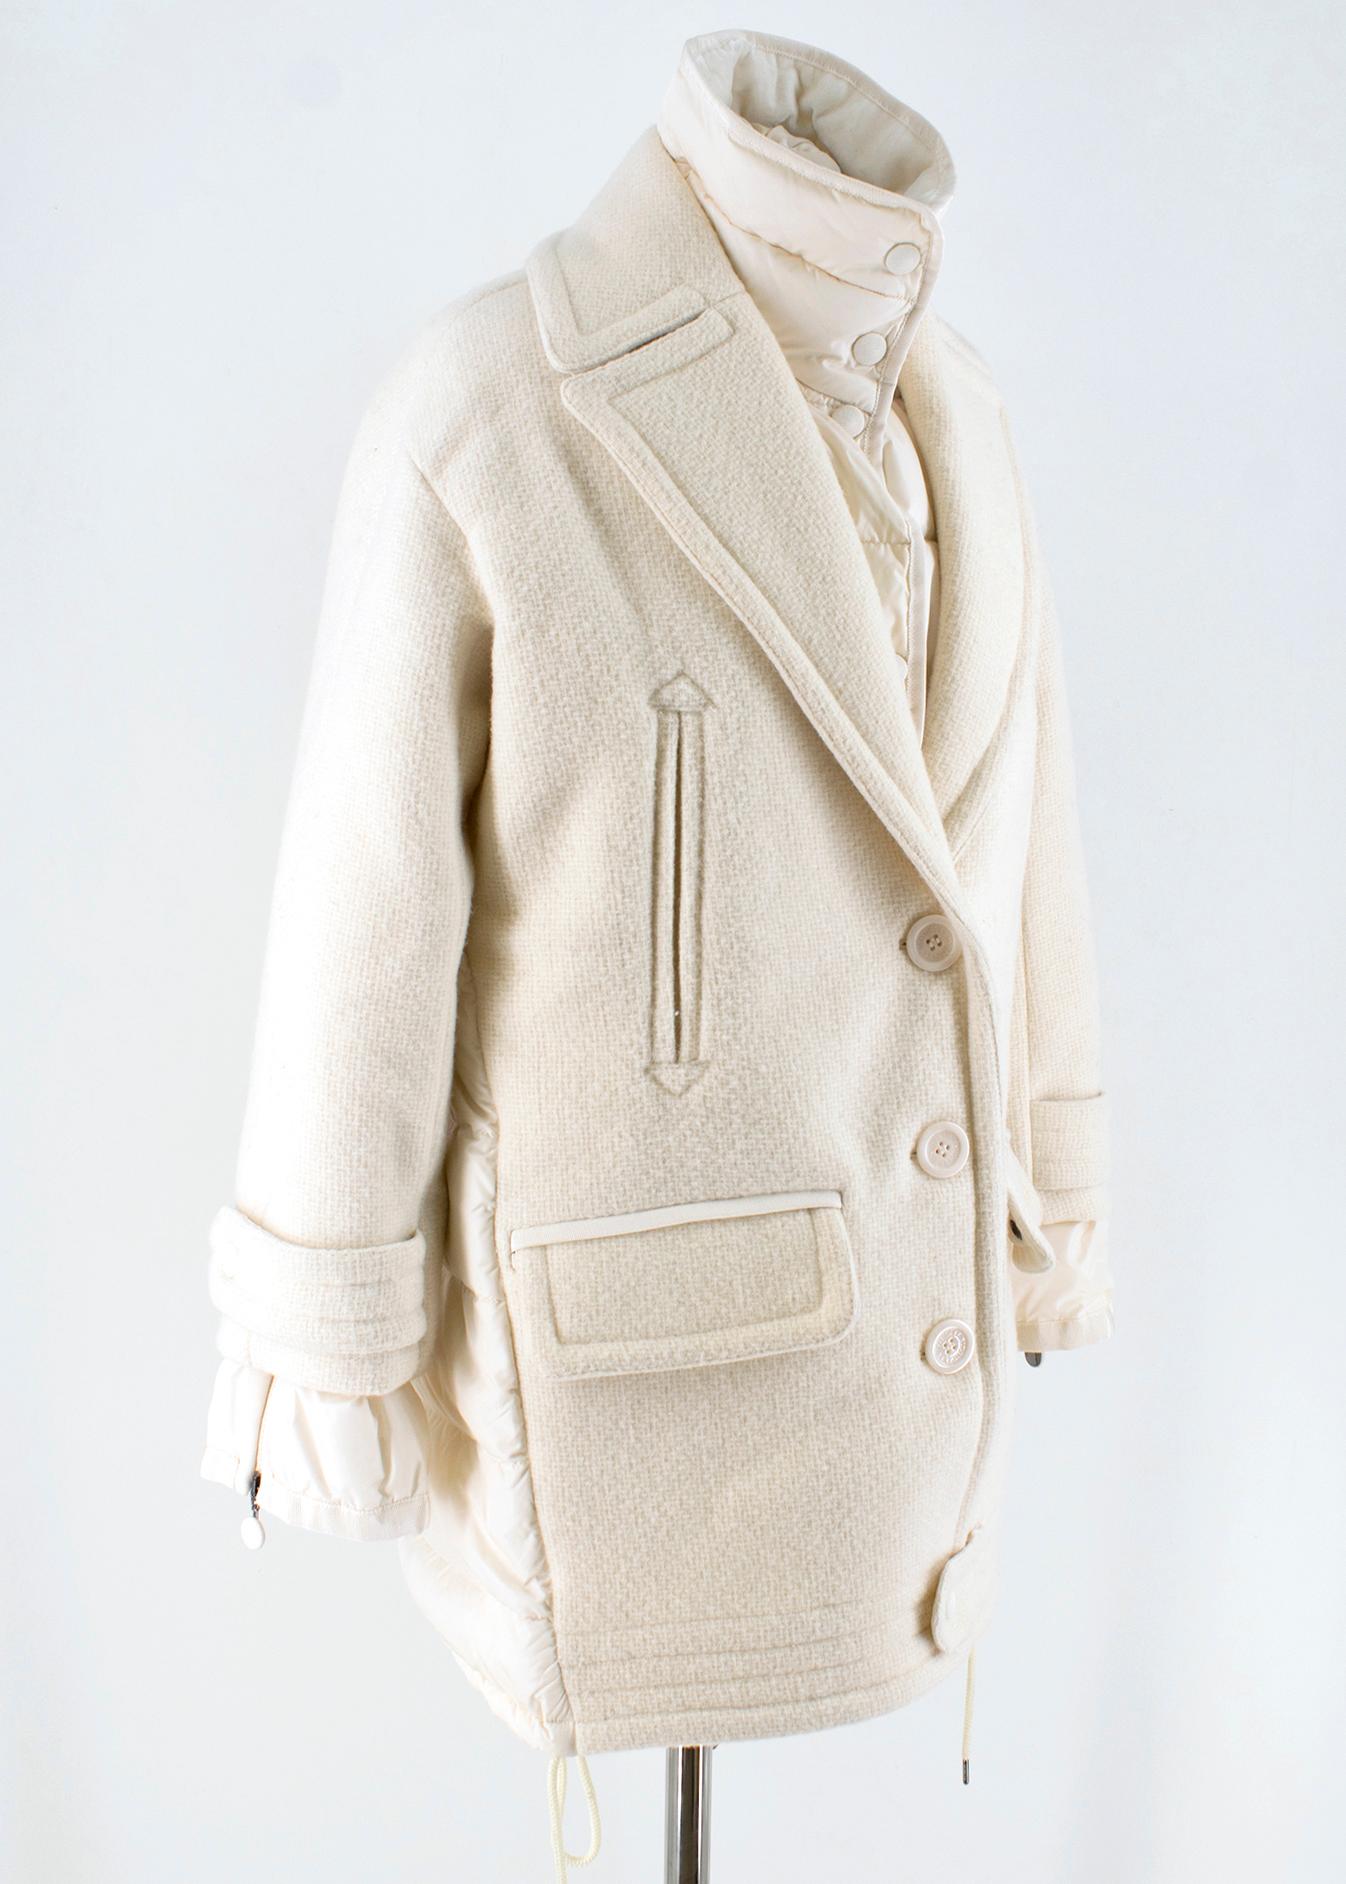 Moncler White Double Layer Down and Wool Coat

- White, heavy-weight, double  layer down and wool coat
- Filled with pure white goose down
- Wool-blend shell, with a insulating down and feather-filled internal layer and at the back
- Centre-front